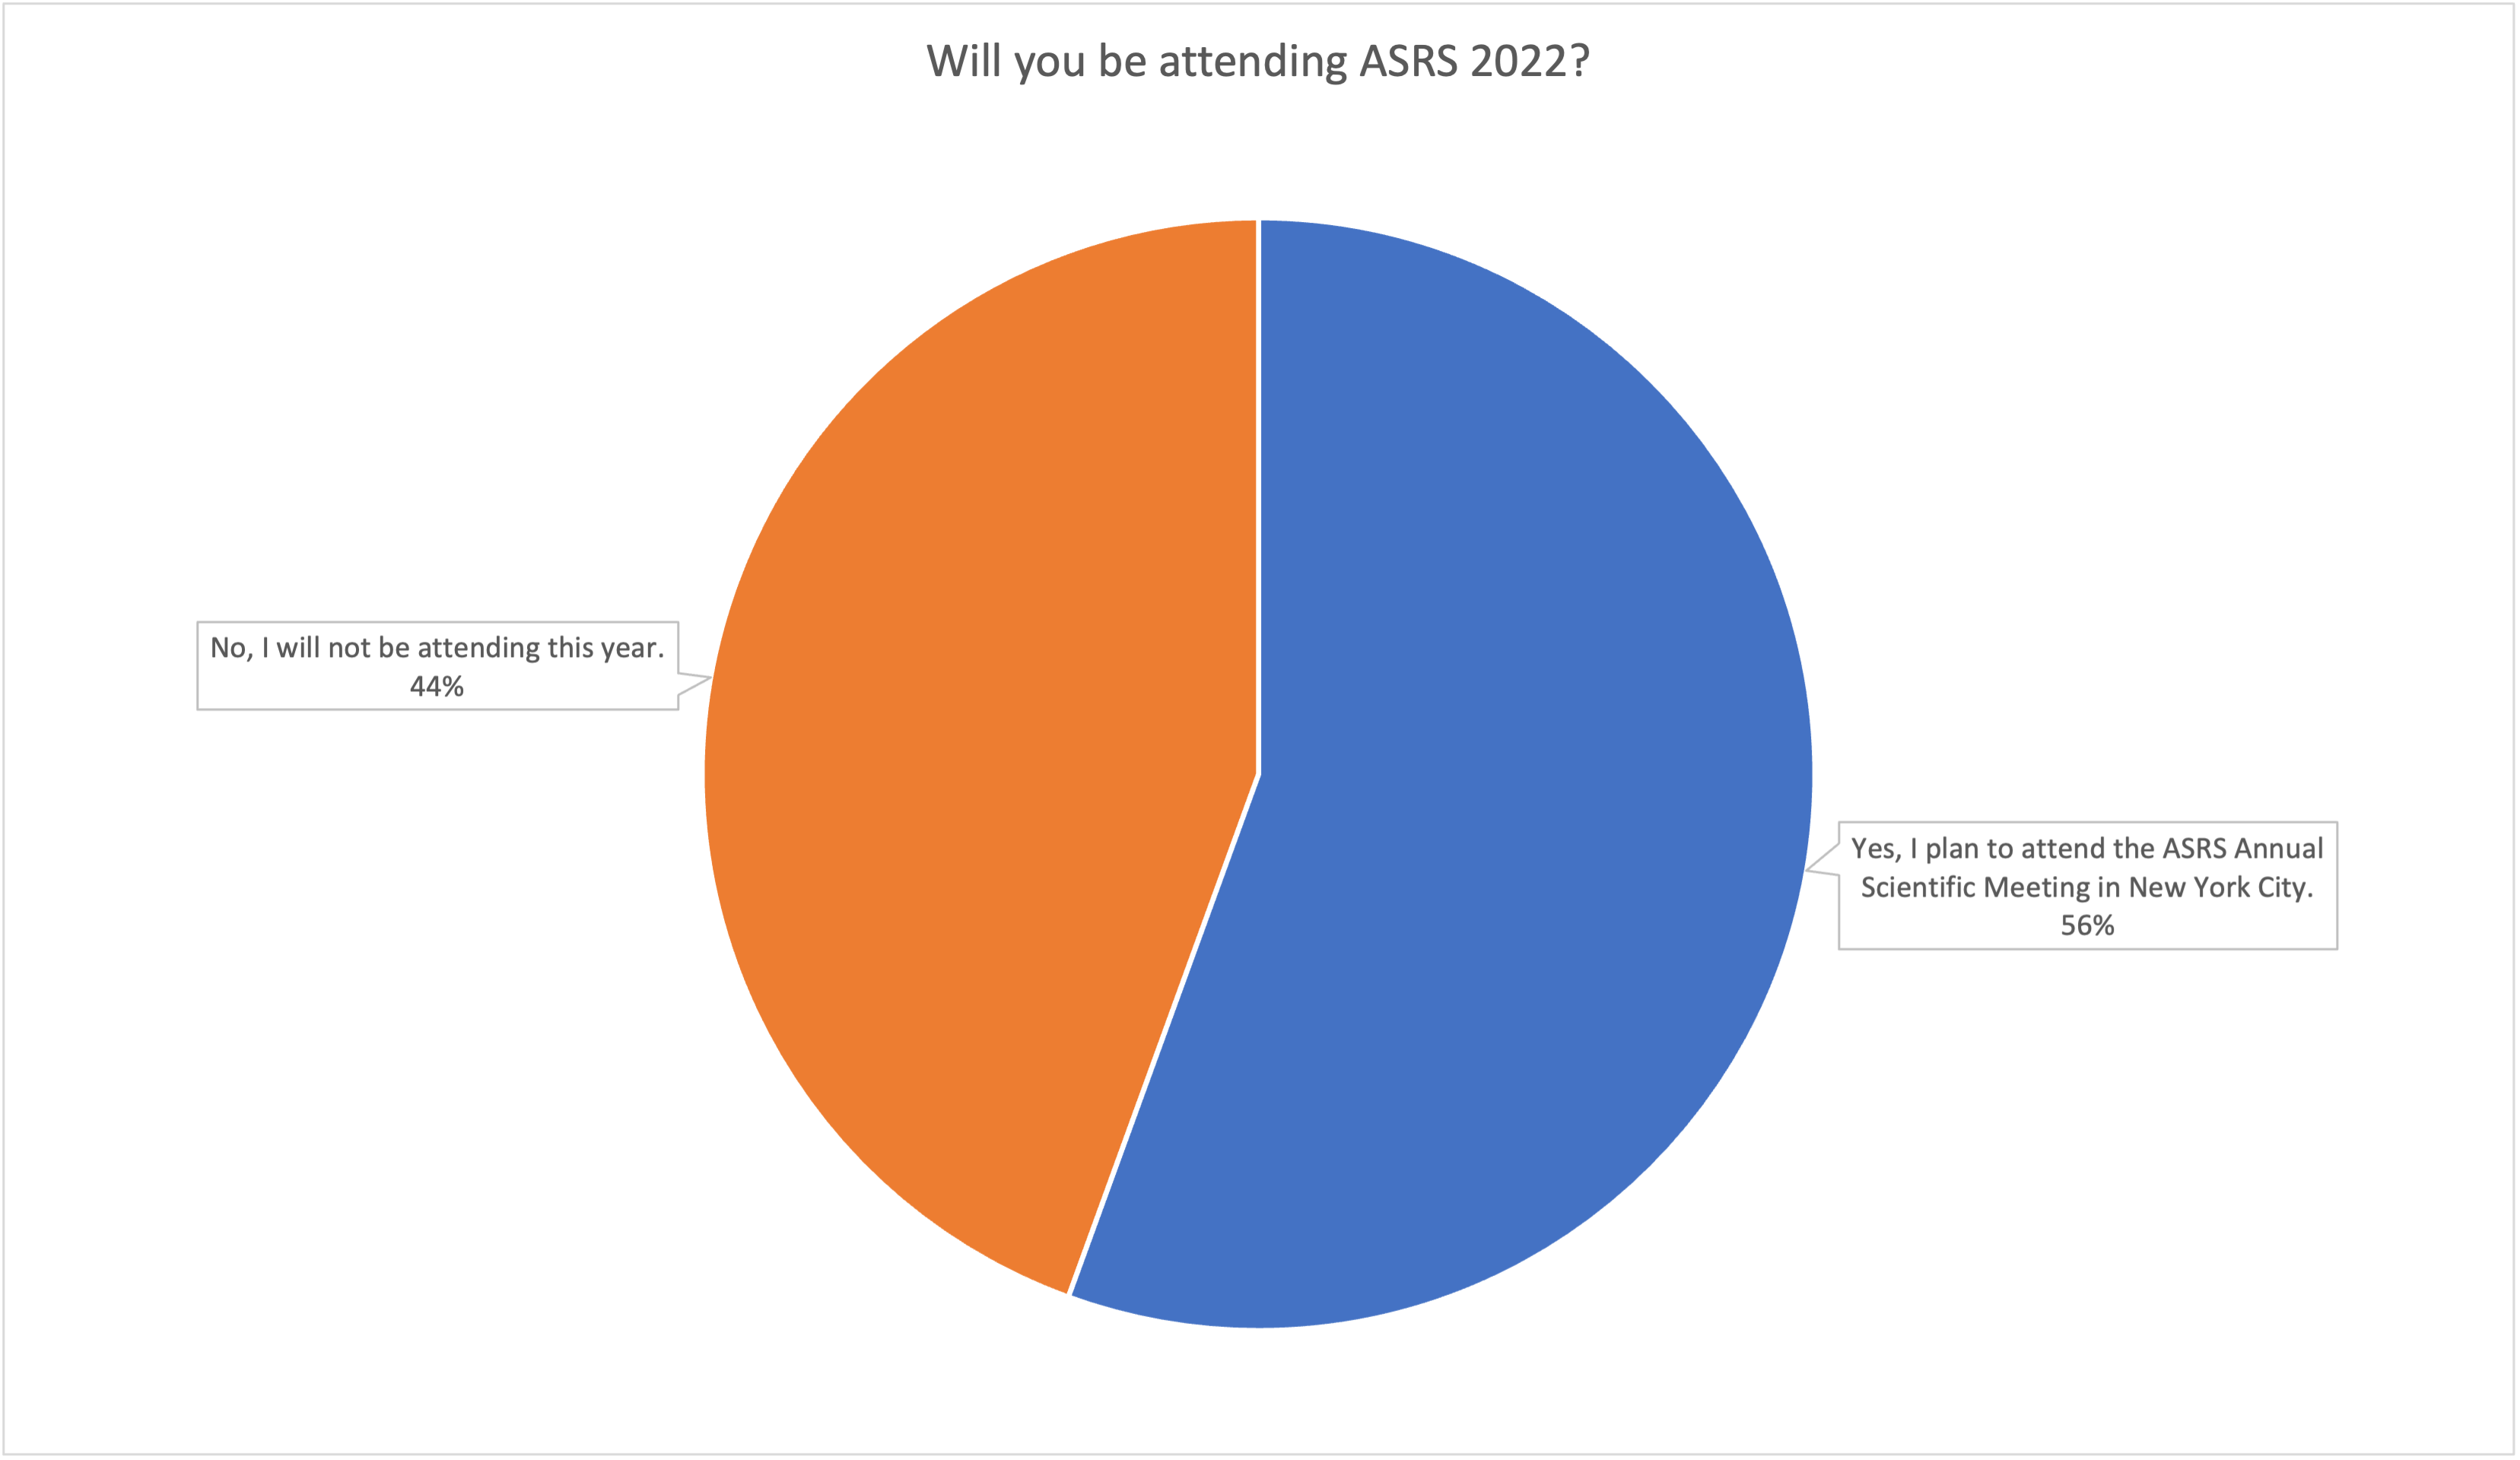 Poll results: Will you be attending ASRS 2022?